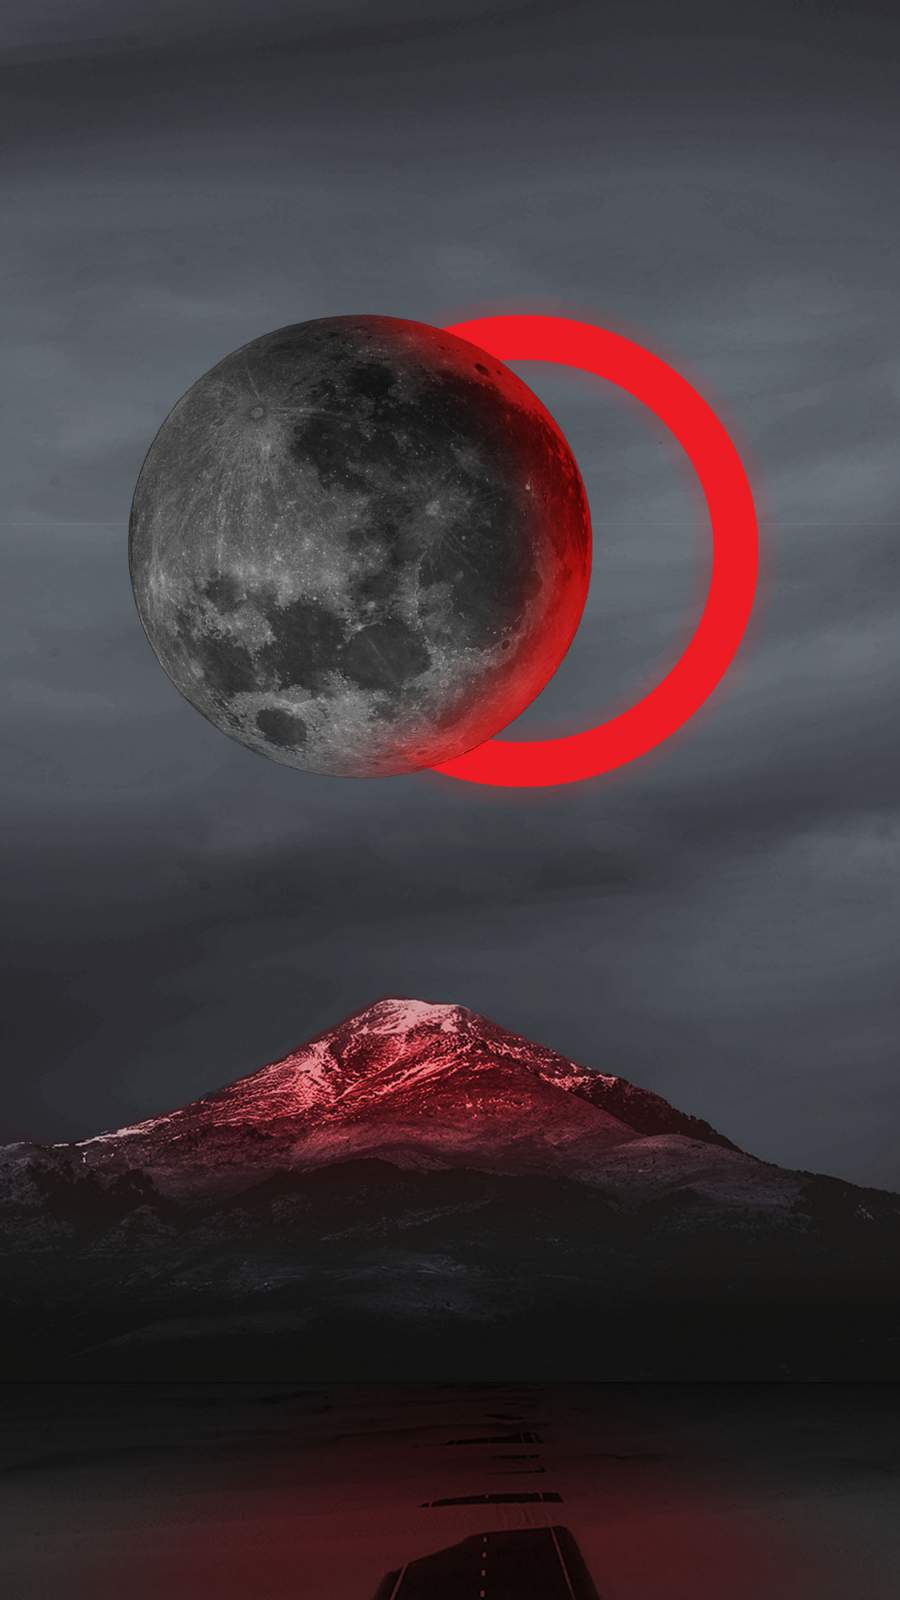 Red Moon IPhone Wallpaper - IPhone Wallpapers : iPhone Wallpapers